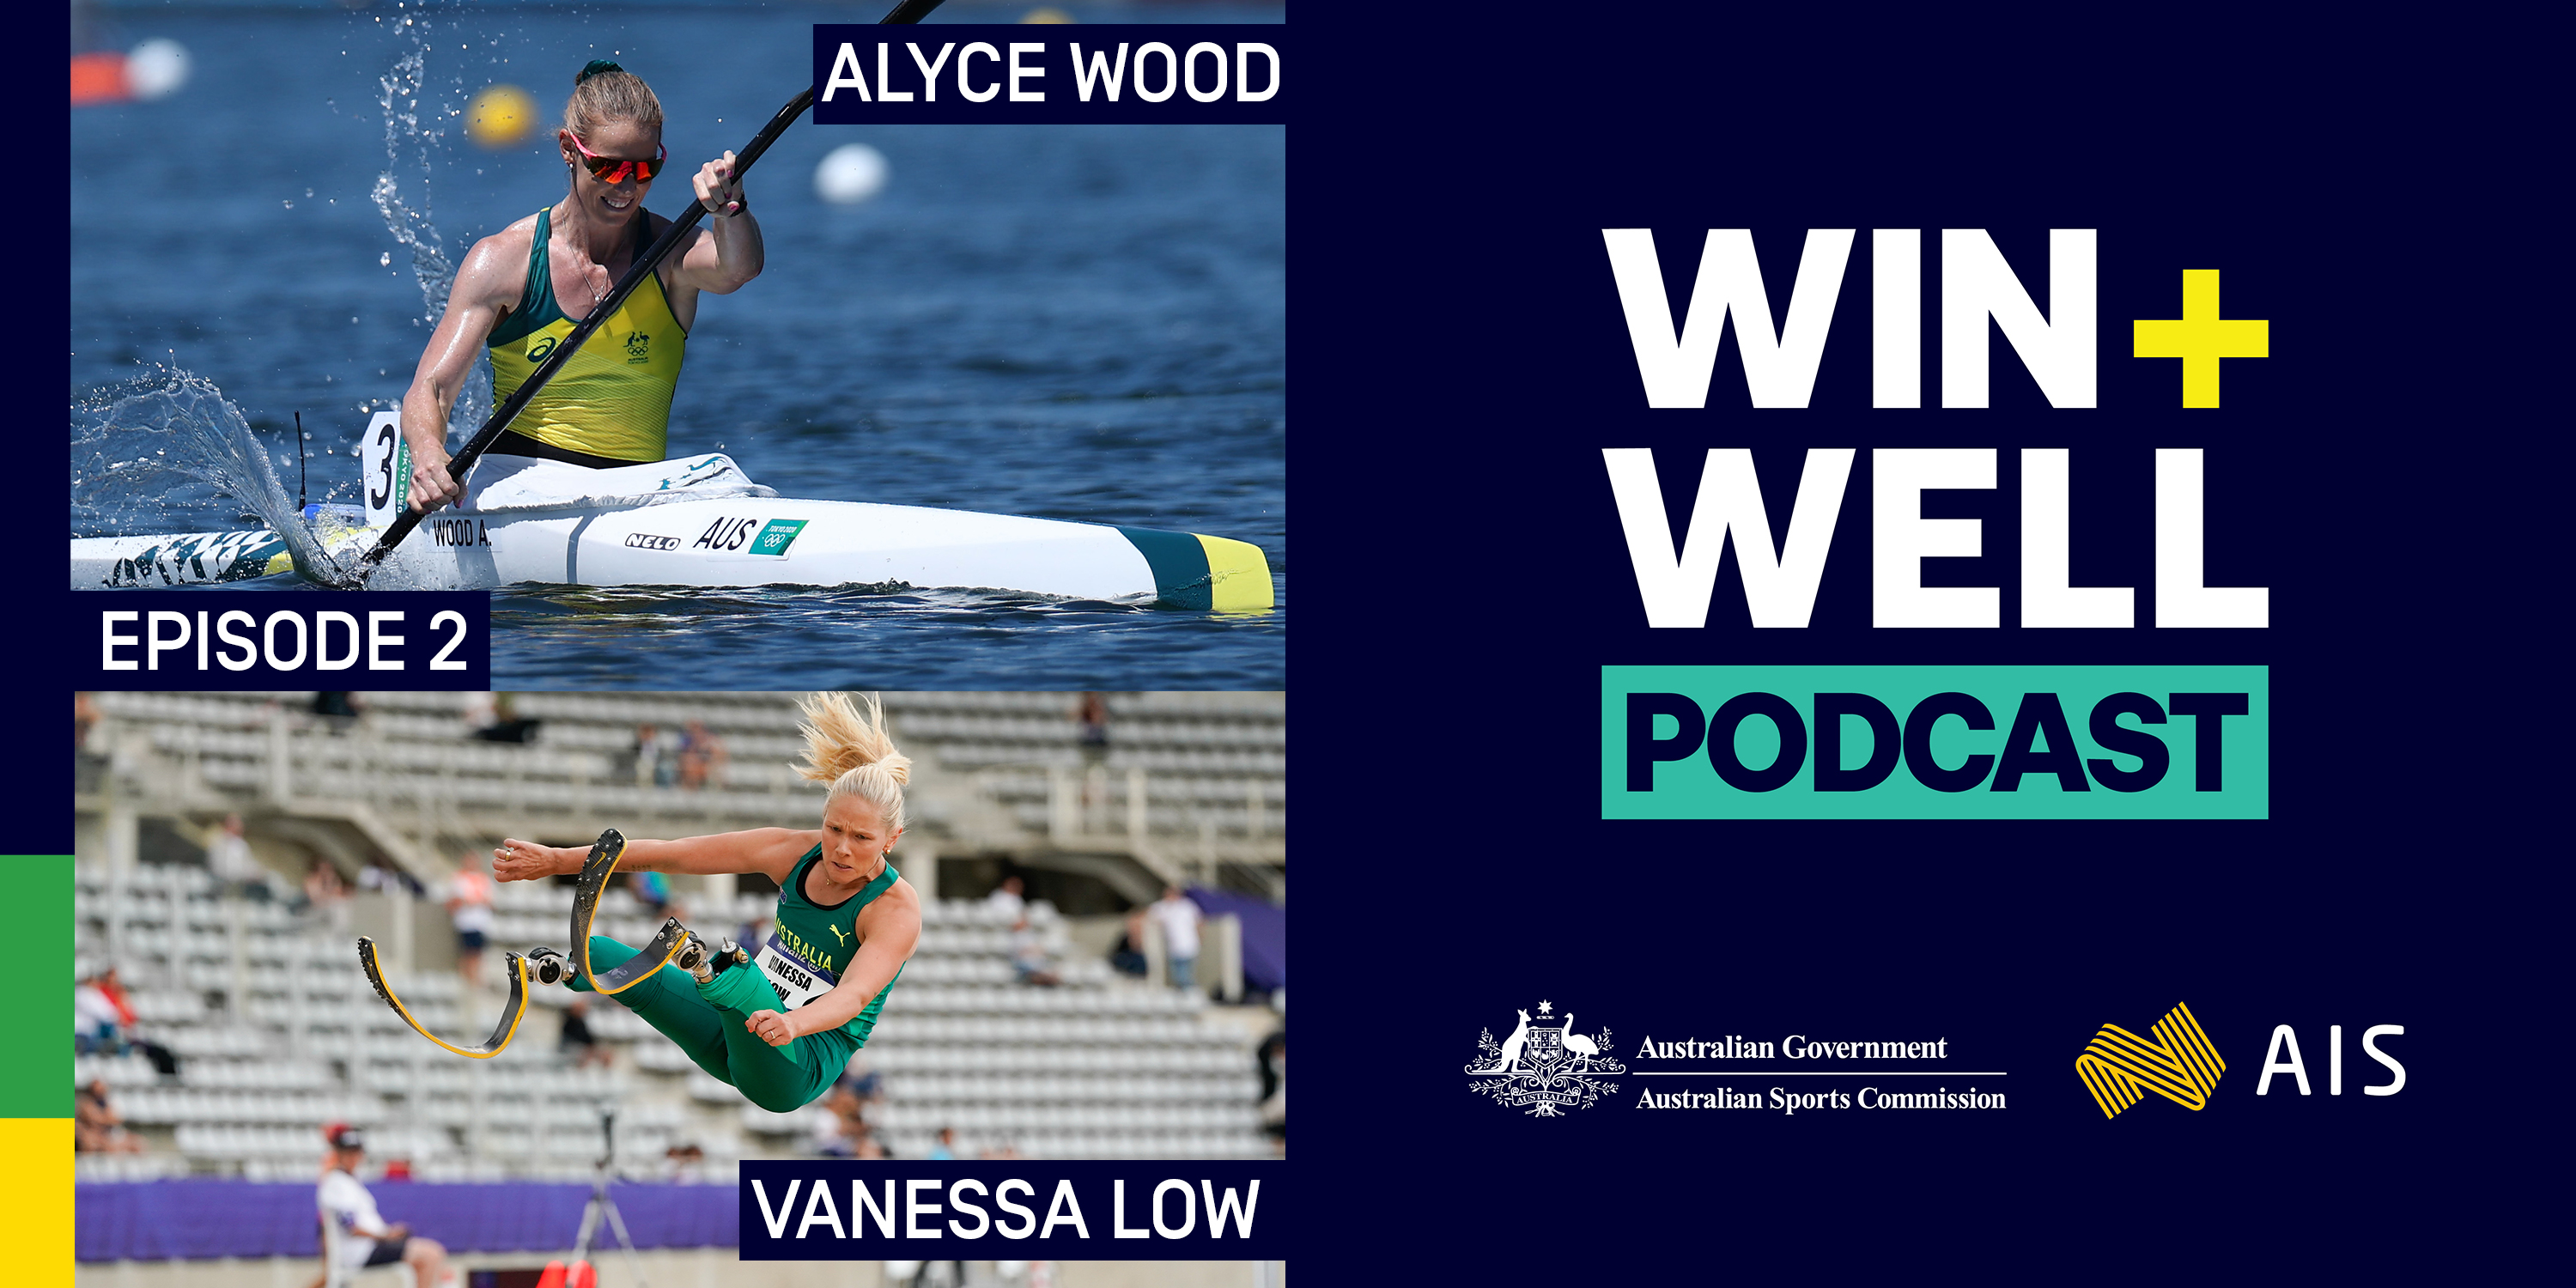 Win Well Podcast Episode 2 featuring Olympian Alyce Wood and Paralympian Vanessa Low.